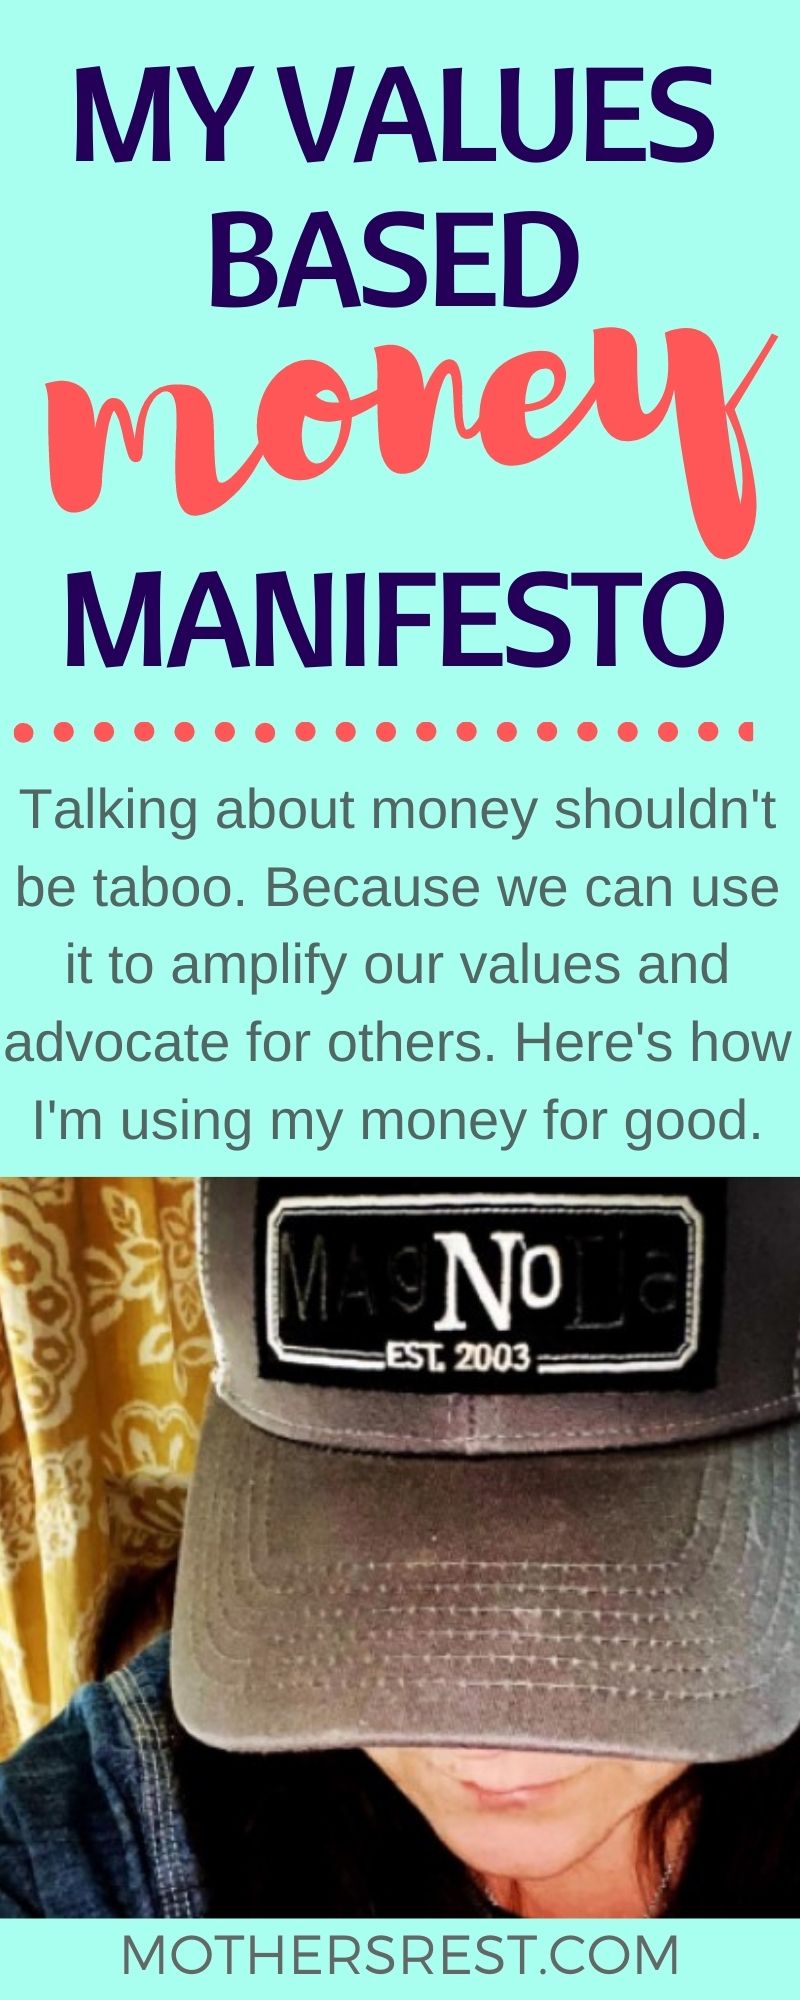 Talking about money should not be taboo. Because we can use it to amplify our values and advocate for others. Here is how I am using my money for good.